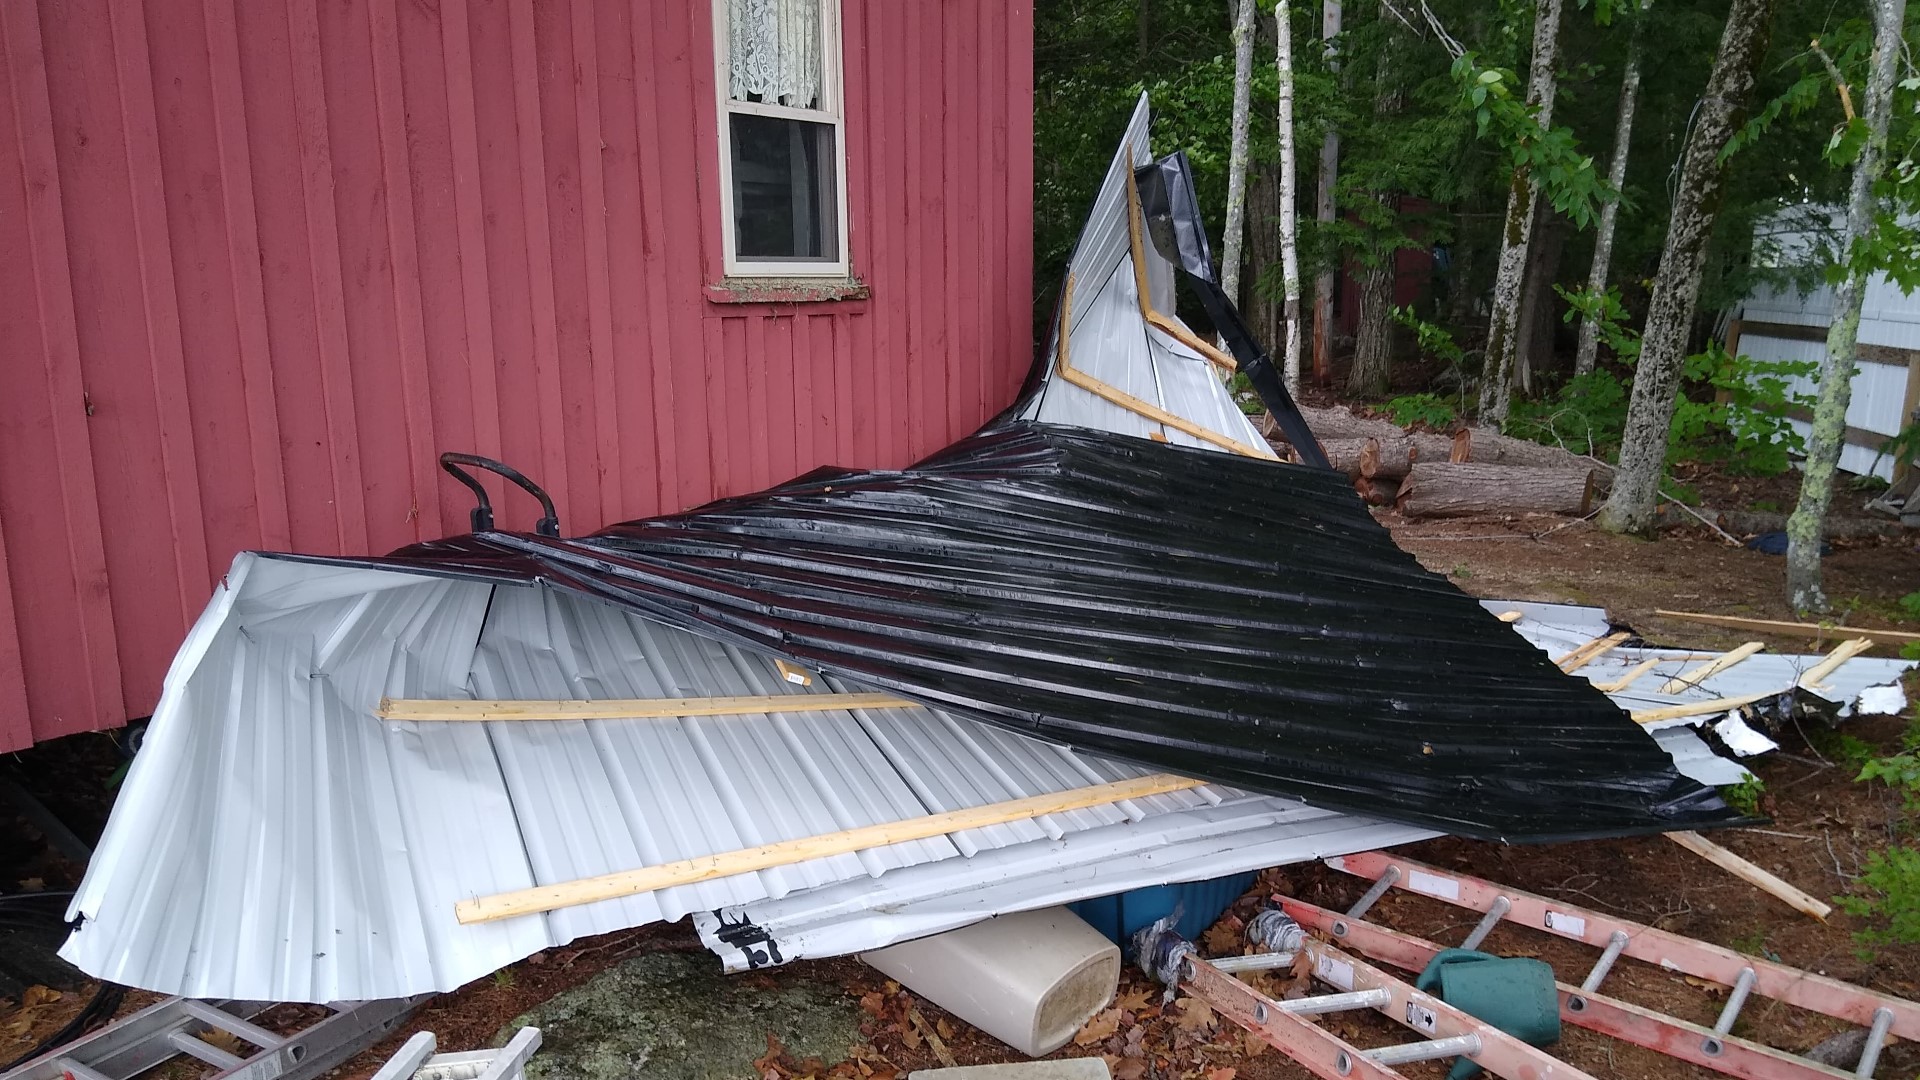 Damaging thunderstorm produces likely western maine tornado